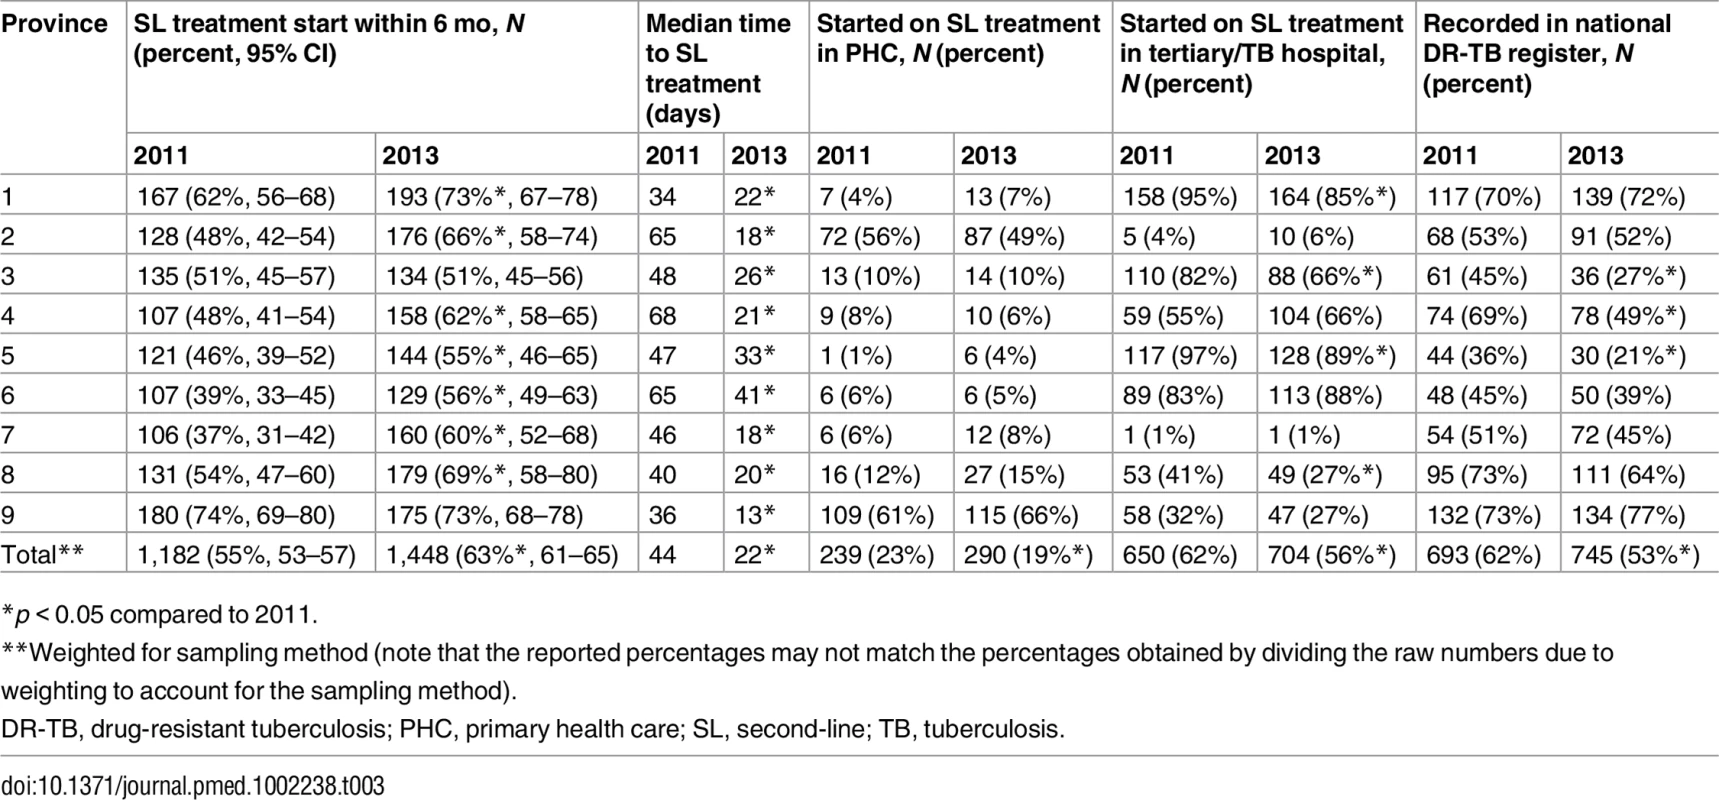 Percentage of patients who initiated treatment, time to treatment, site of treatment initiation, and recording in national drug-resistant tuberculosis register by cohort and province (new rifampicin-resistant tuberculosis patients).